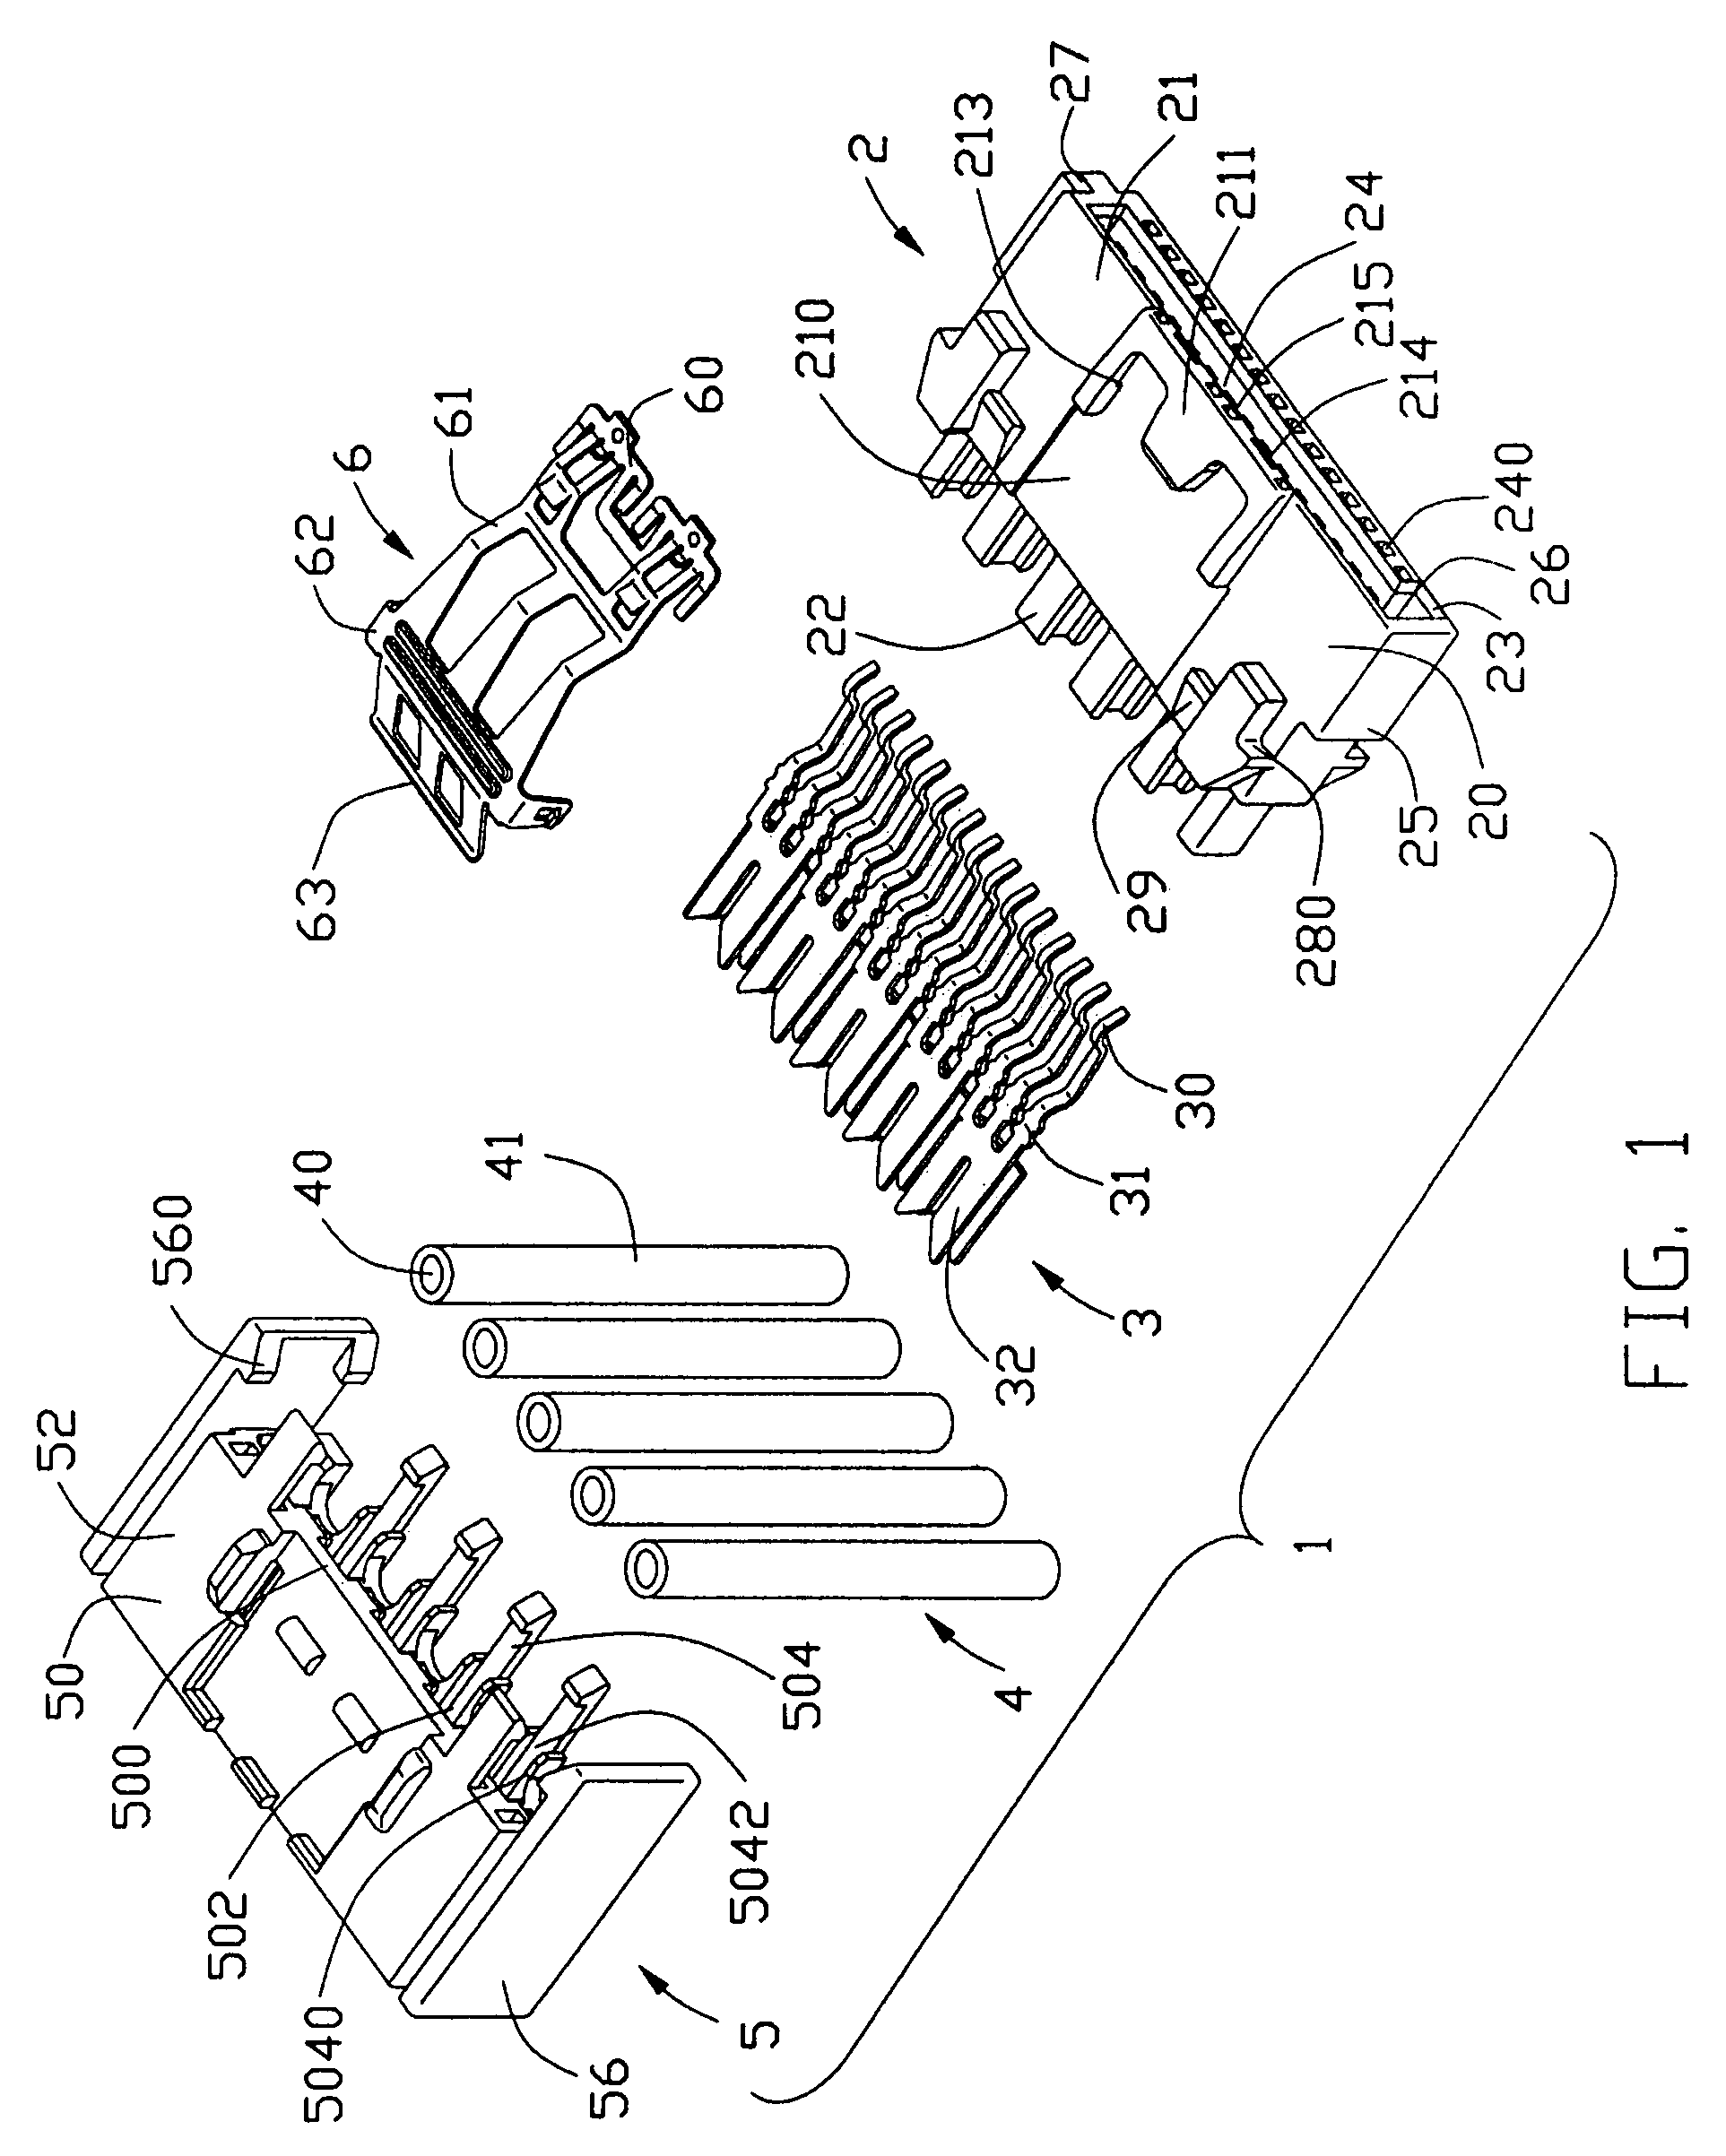 Cable end connector assembly having locking member